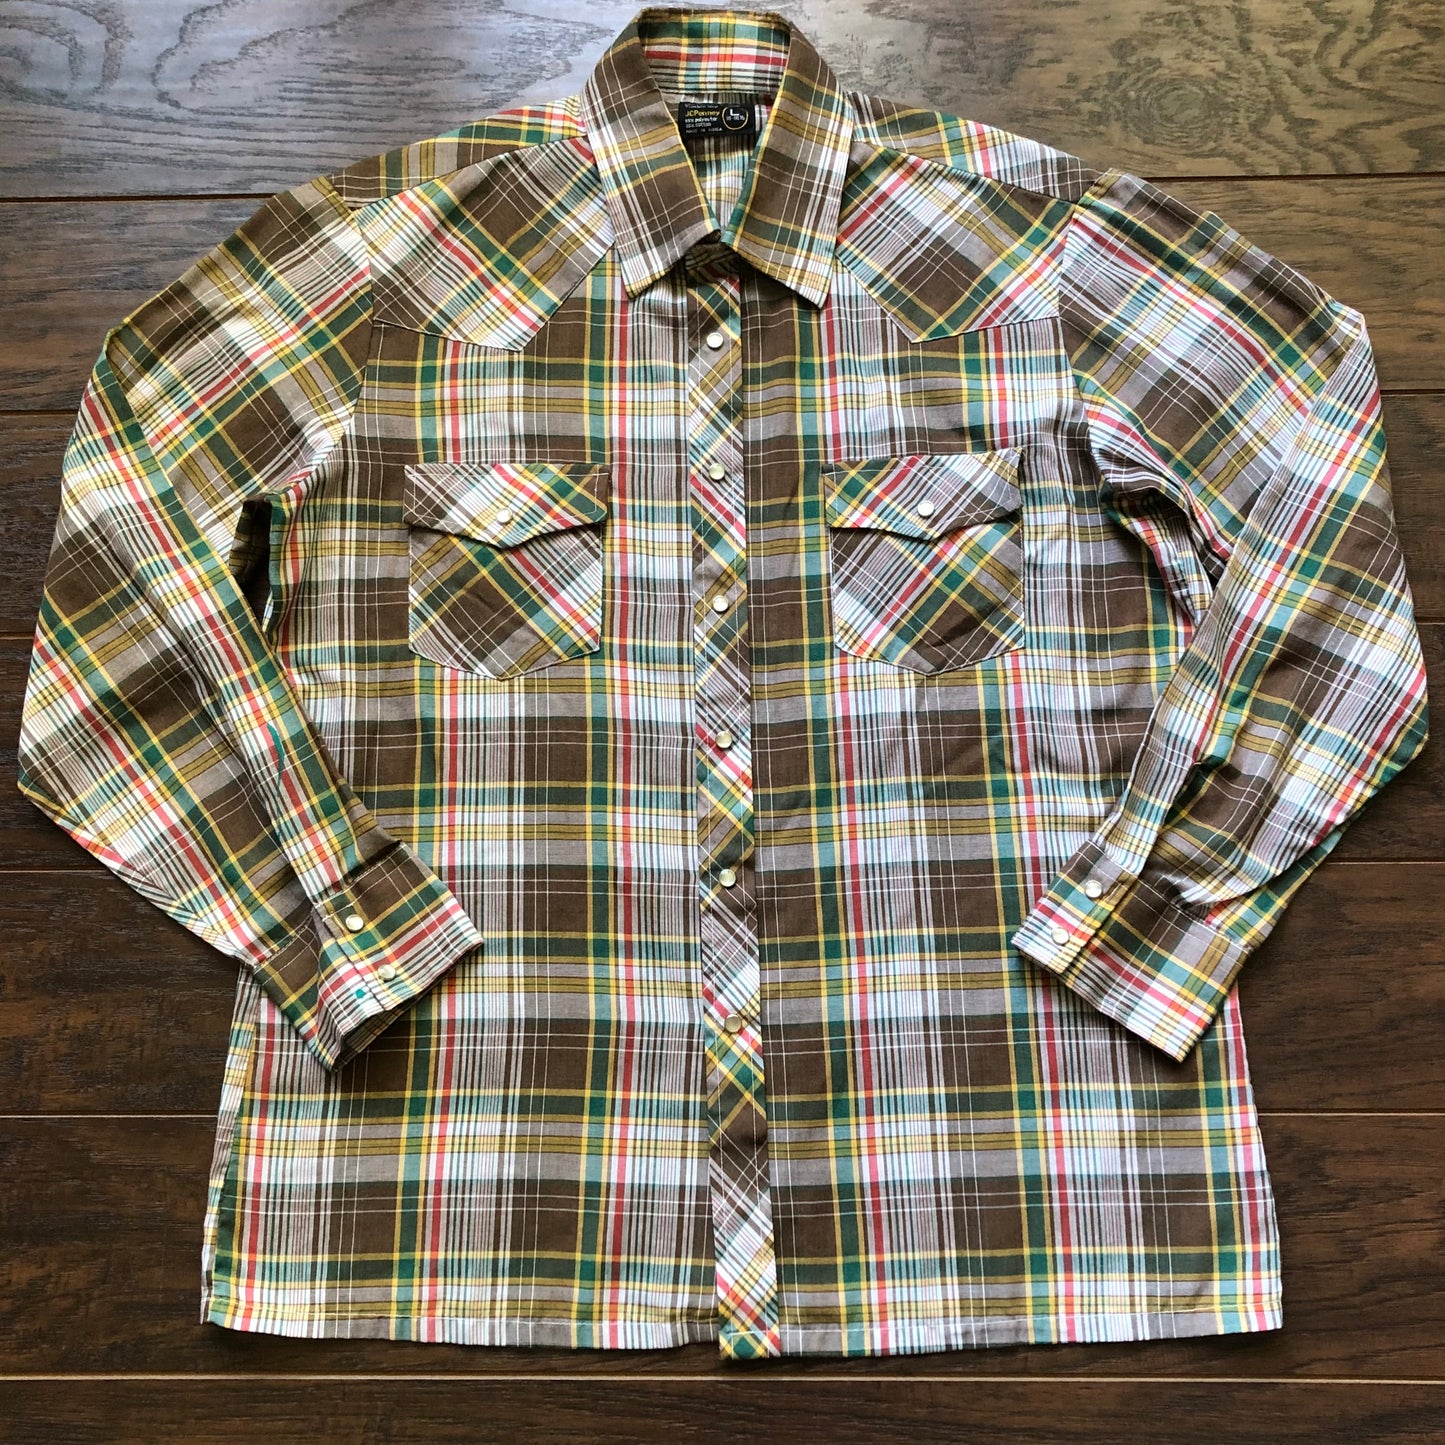 80’s Men’s Vintage Western Rockabilly Plaid Shirt with Snap Buttons | Made in Korea